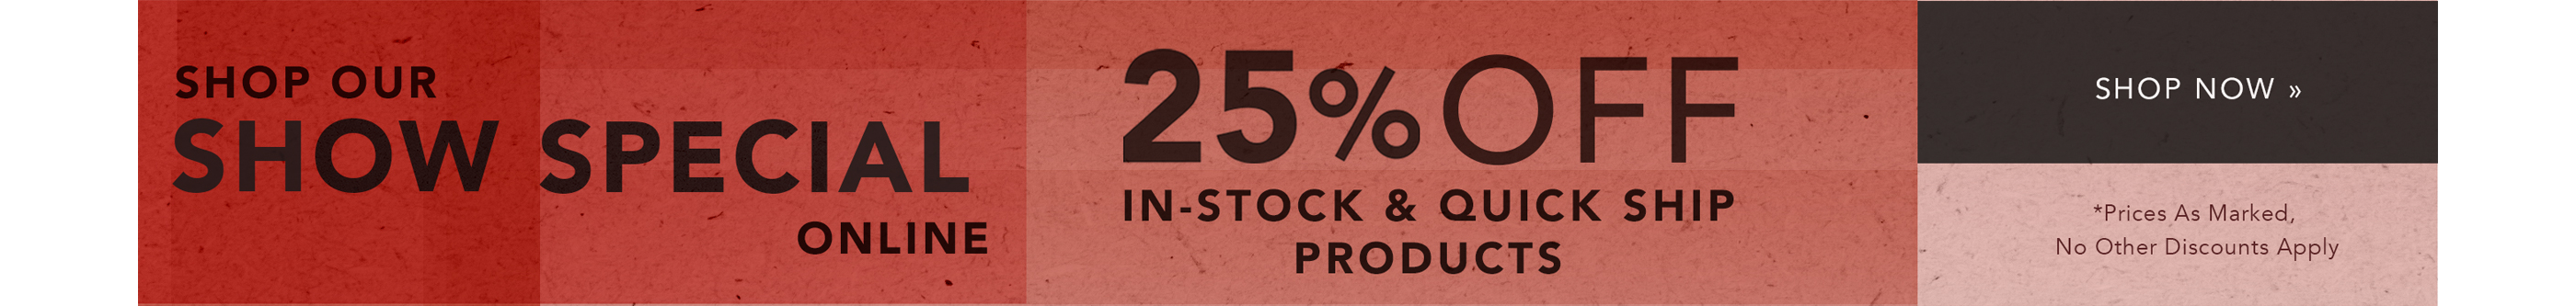 Shop Now Our Show Special 25% Off In-Stock & Quick-Ship Products